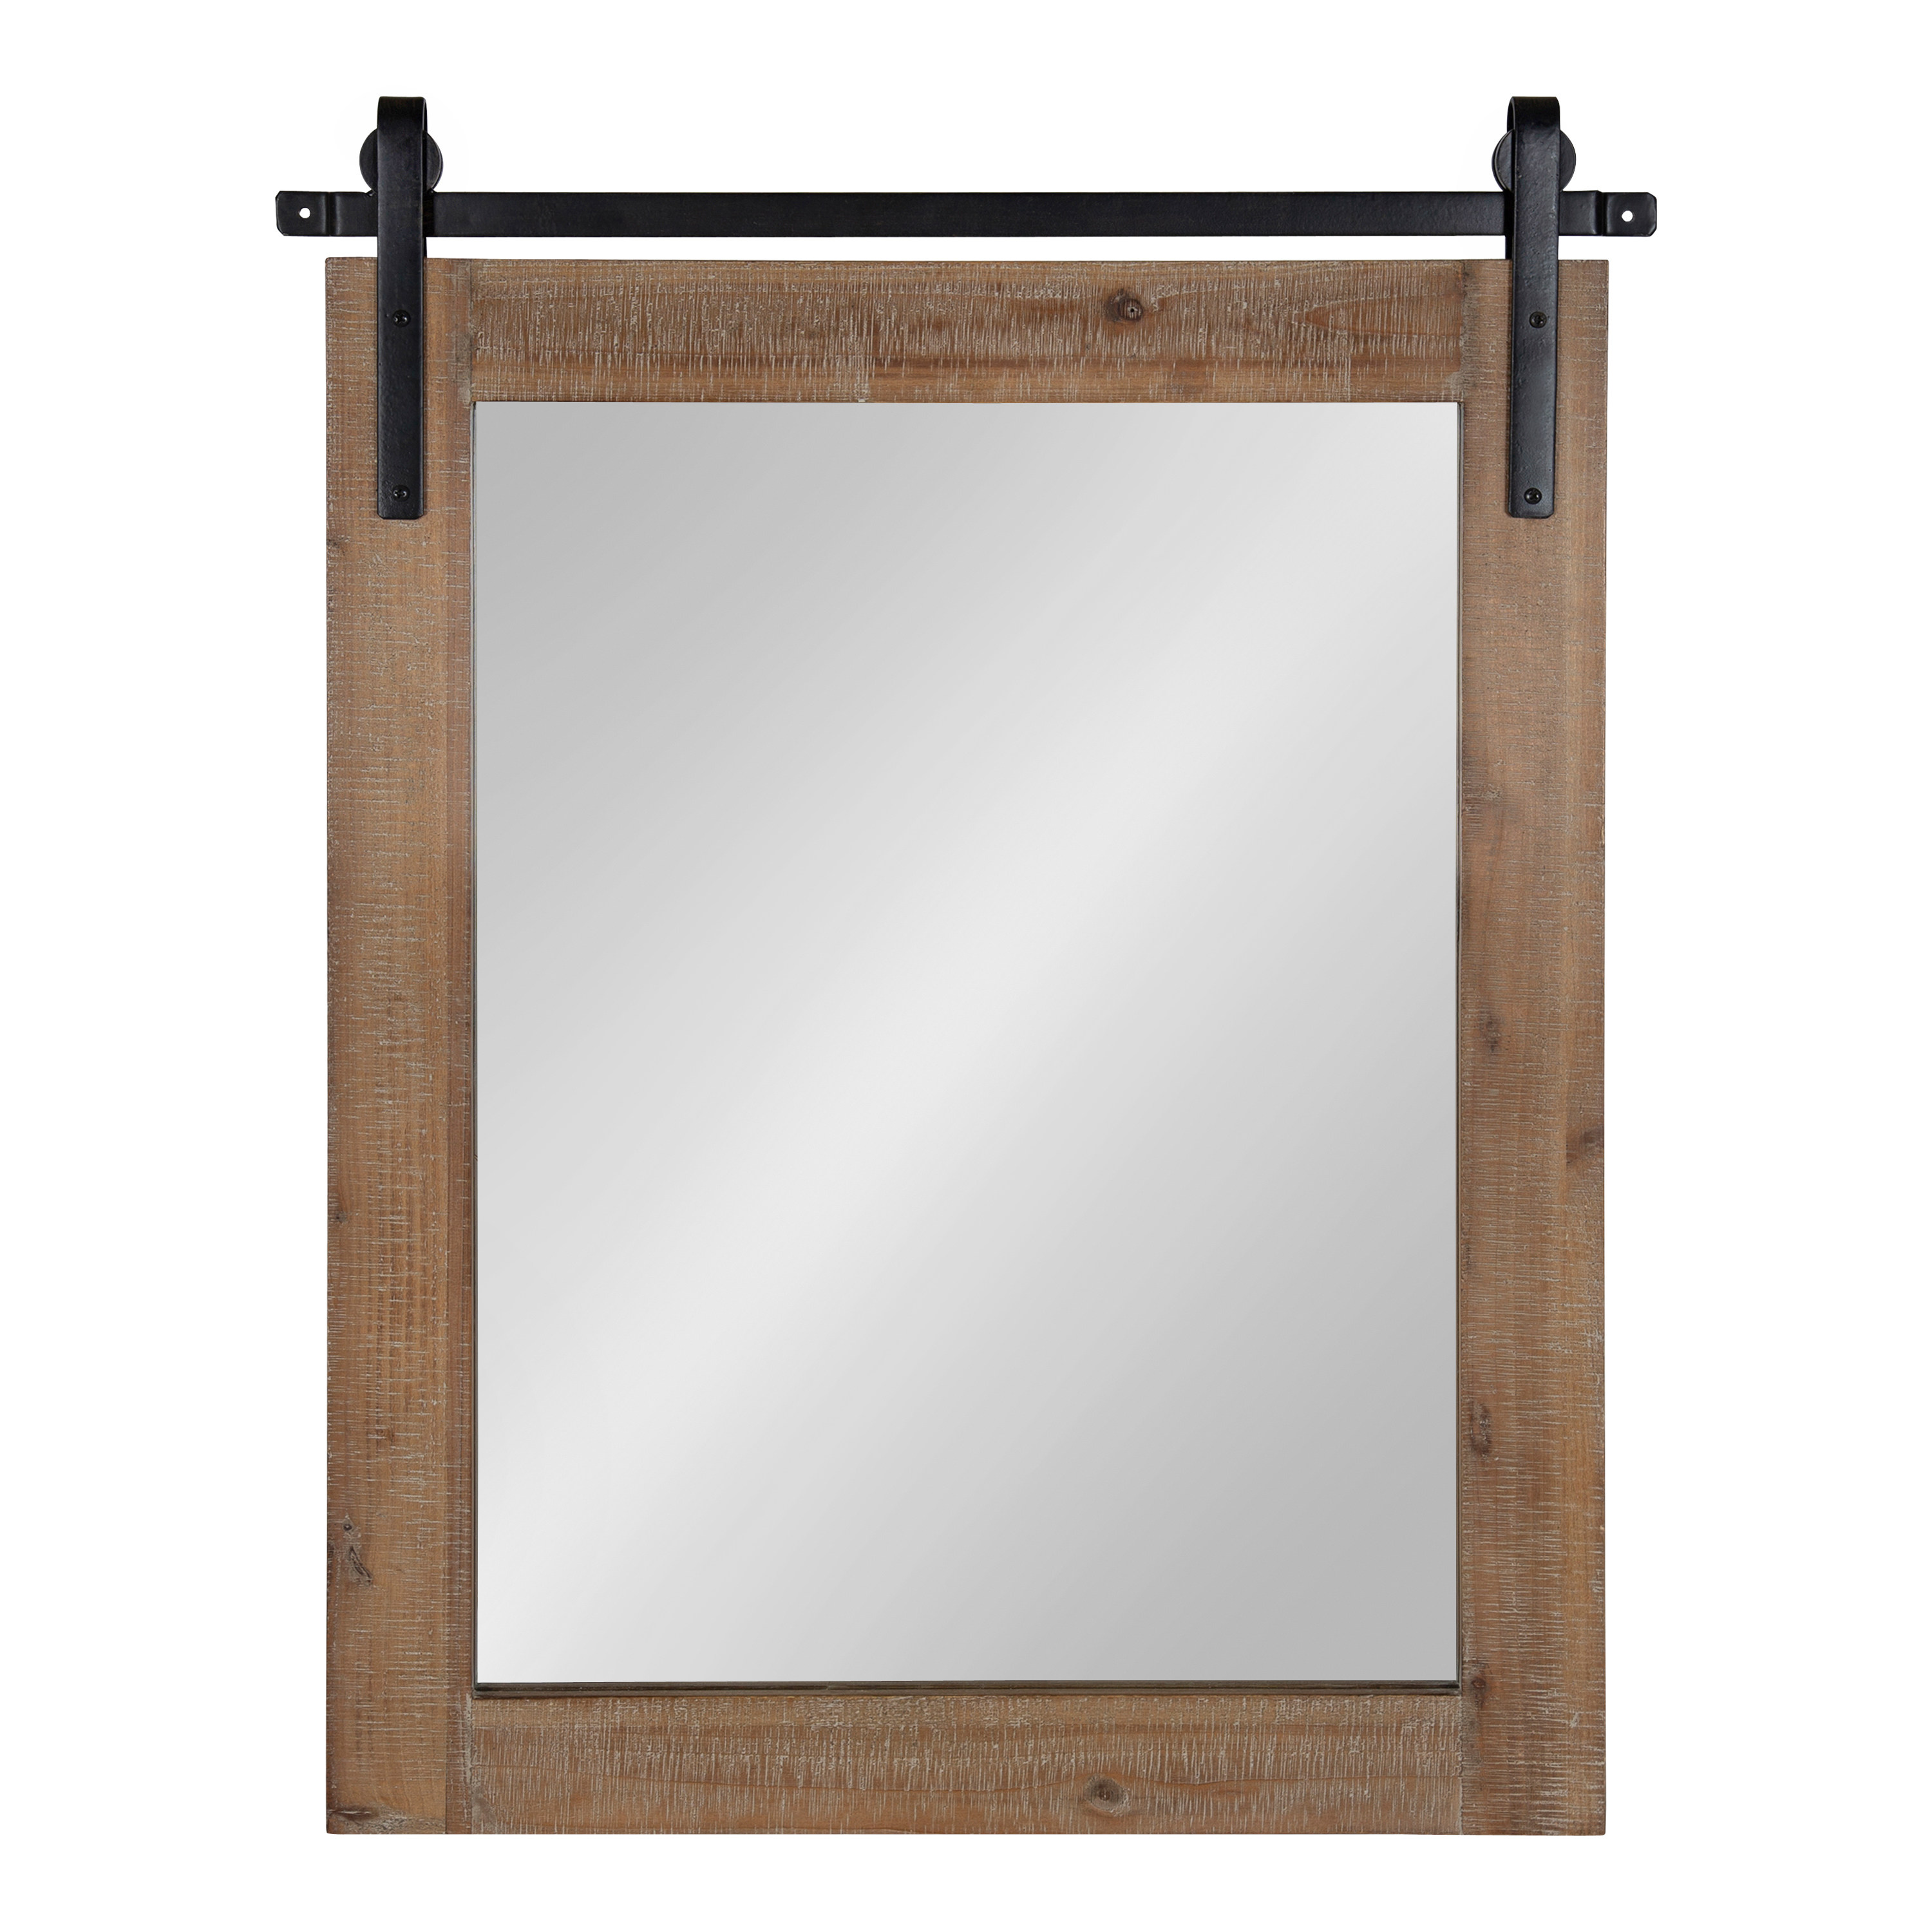 Kate and Laurel Cates Rustic Wall Mirror, 22" x 30" Rustic Brown, Farmhouse Barn Door-Inspired Wall Decor - image 2 of 7